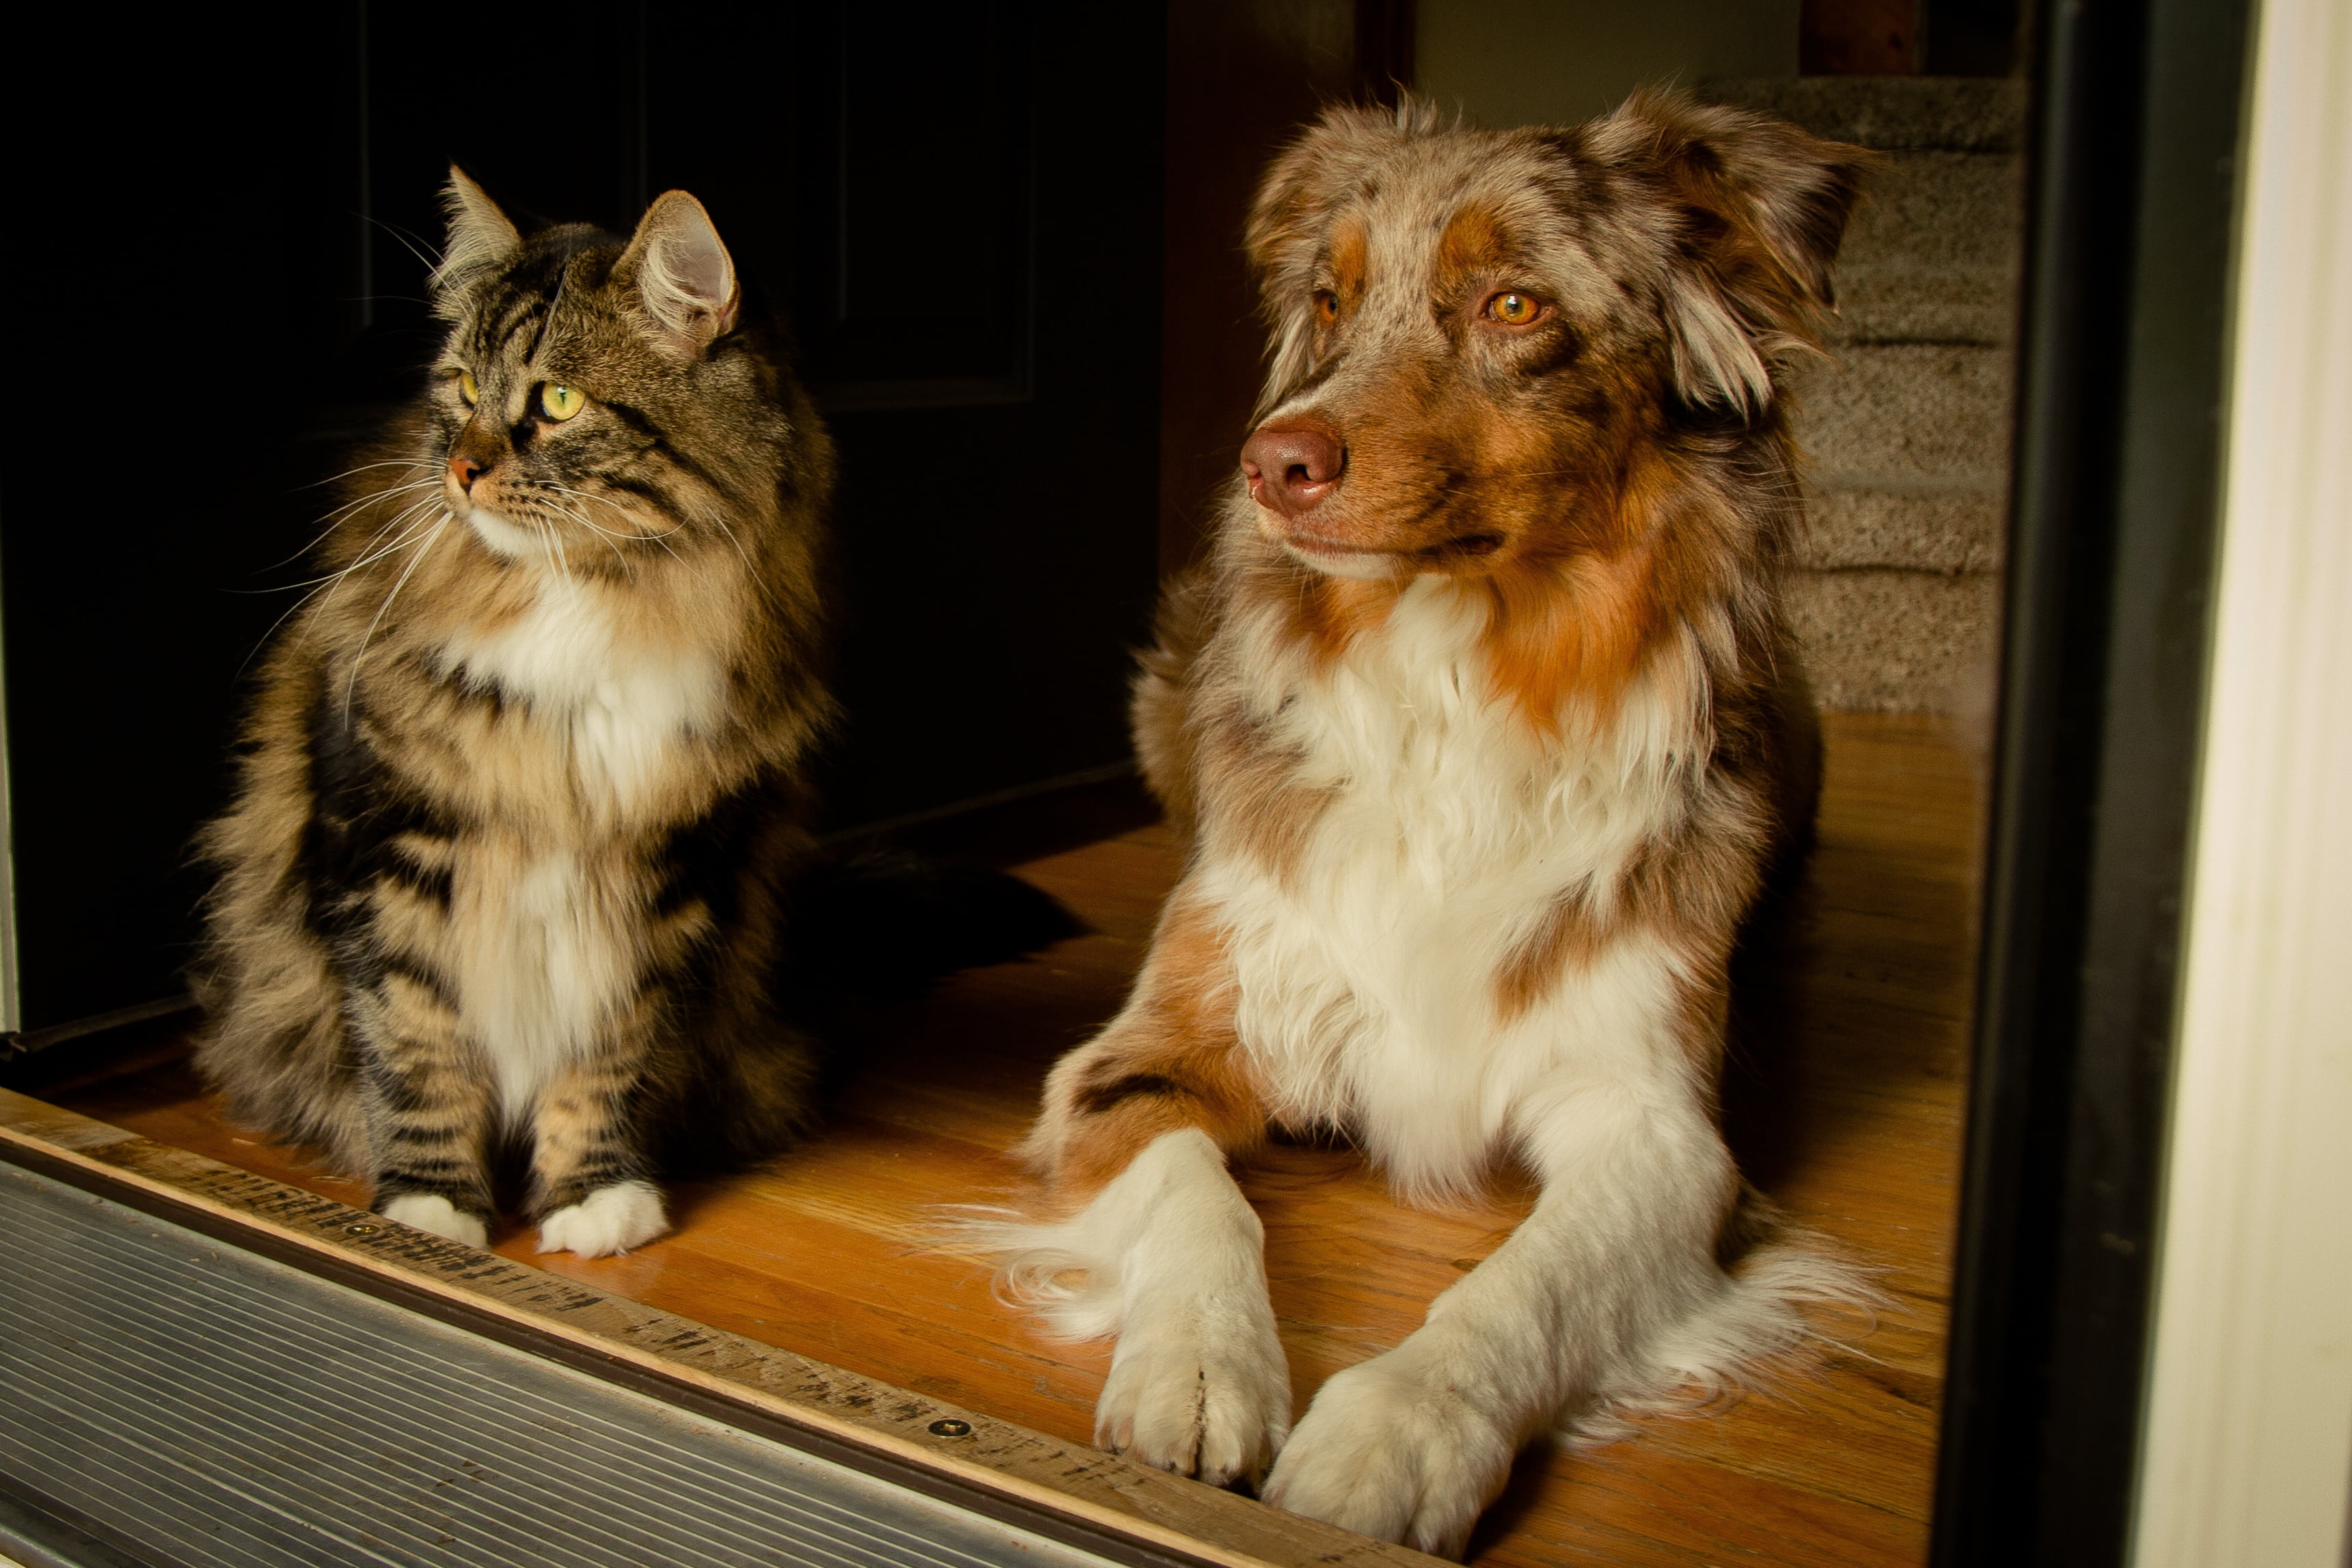 white and brown Himalayan cat and long-coat white and brown dog